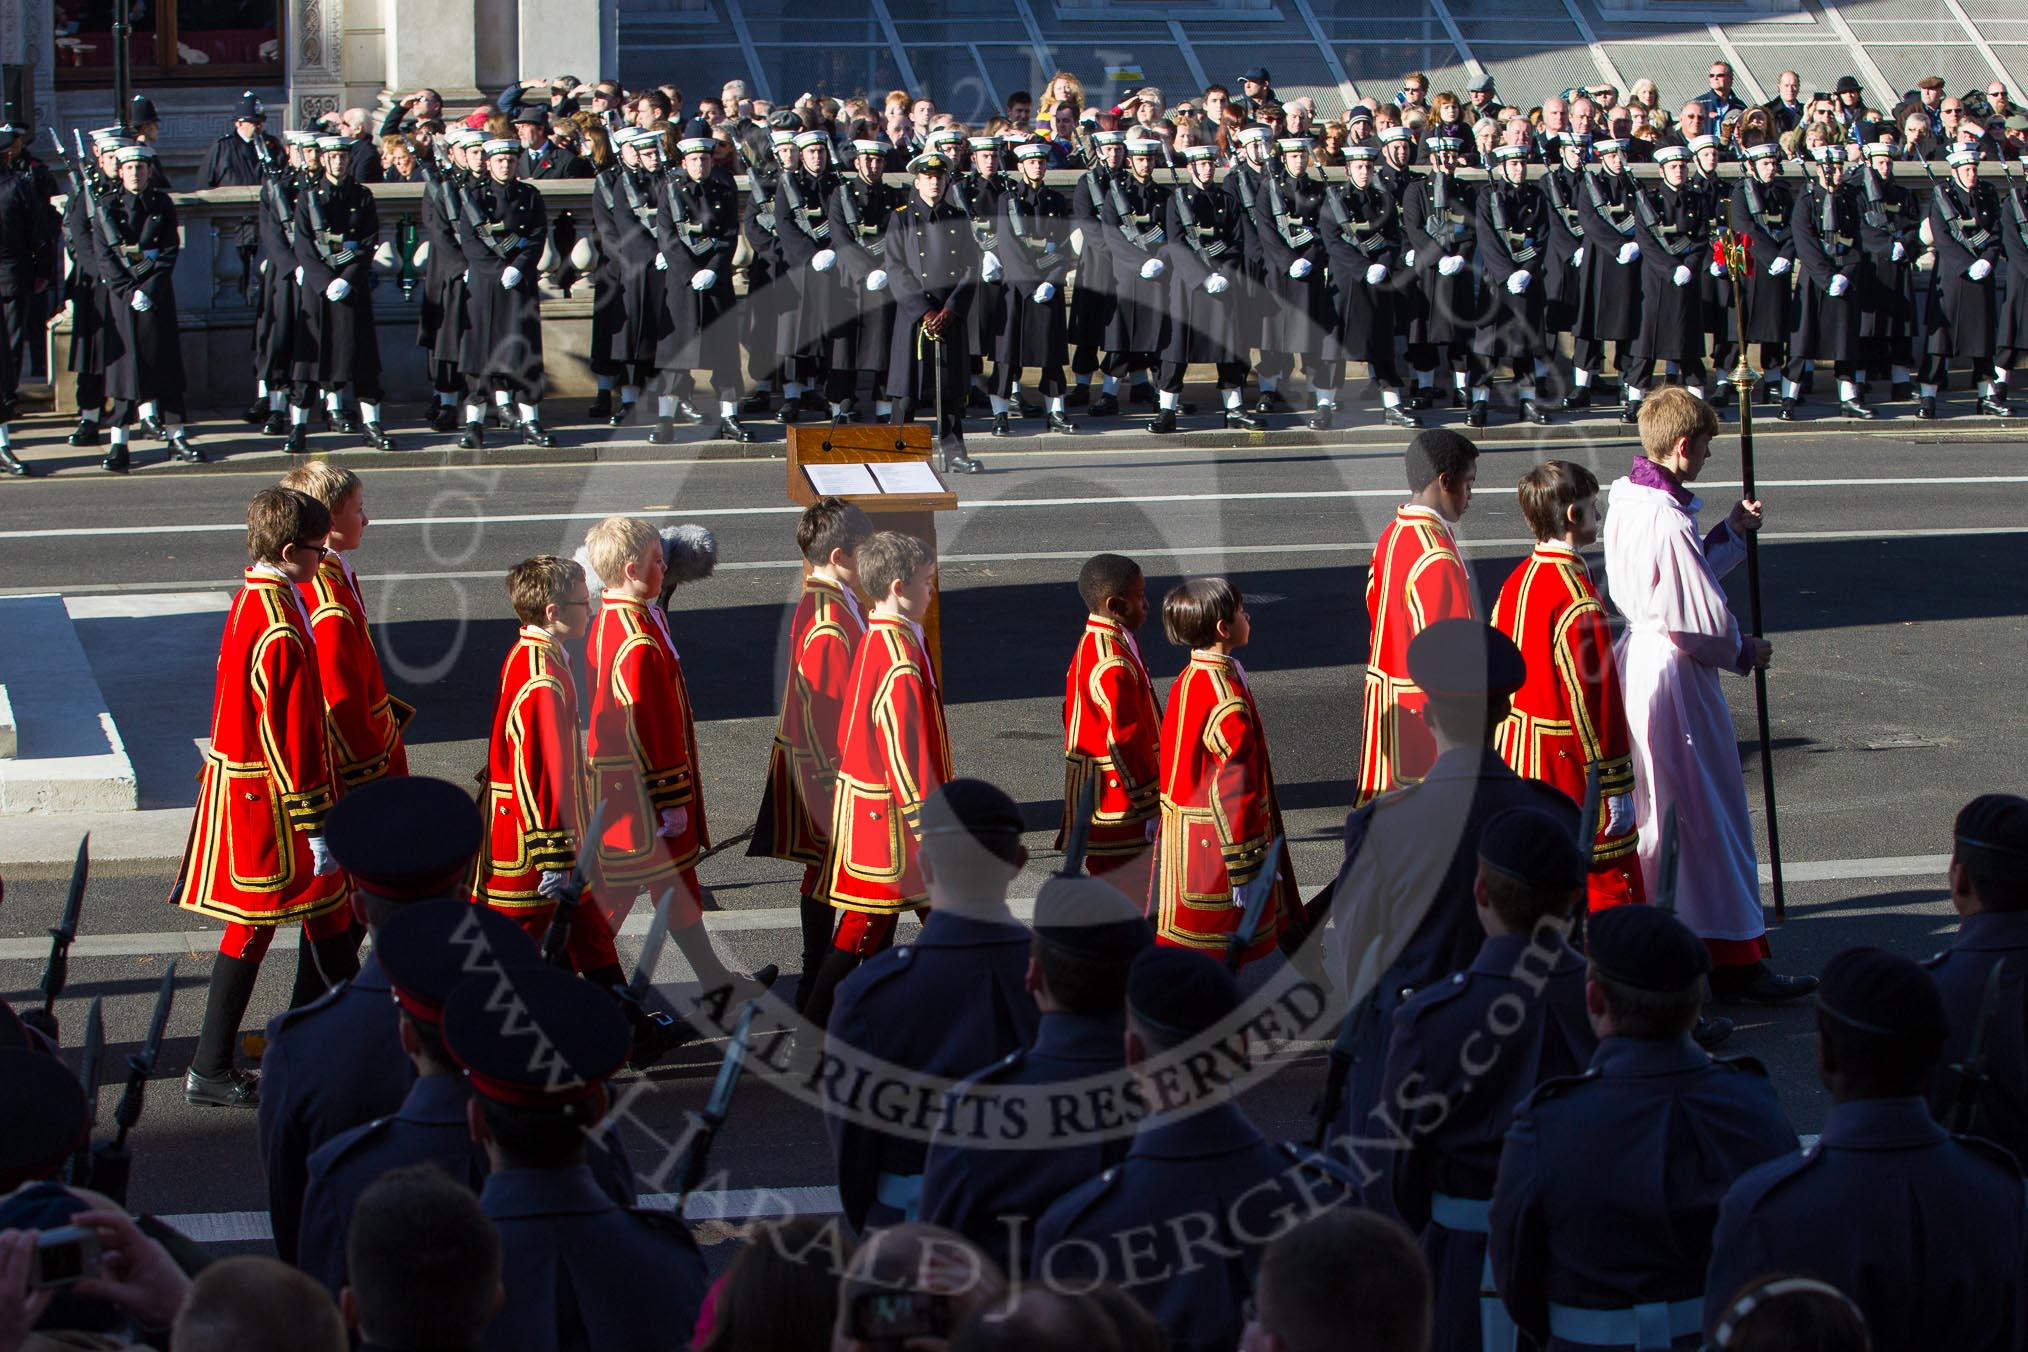 The Choir, led by the Cross Bearer, Jack Fonseca-Burtt, followed by 10 children of the Chapel Royal, getting into position on the south-eastern side of the Cenotaph.